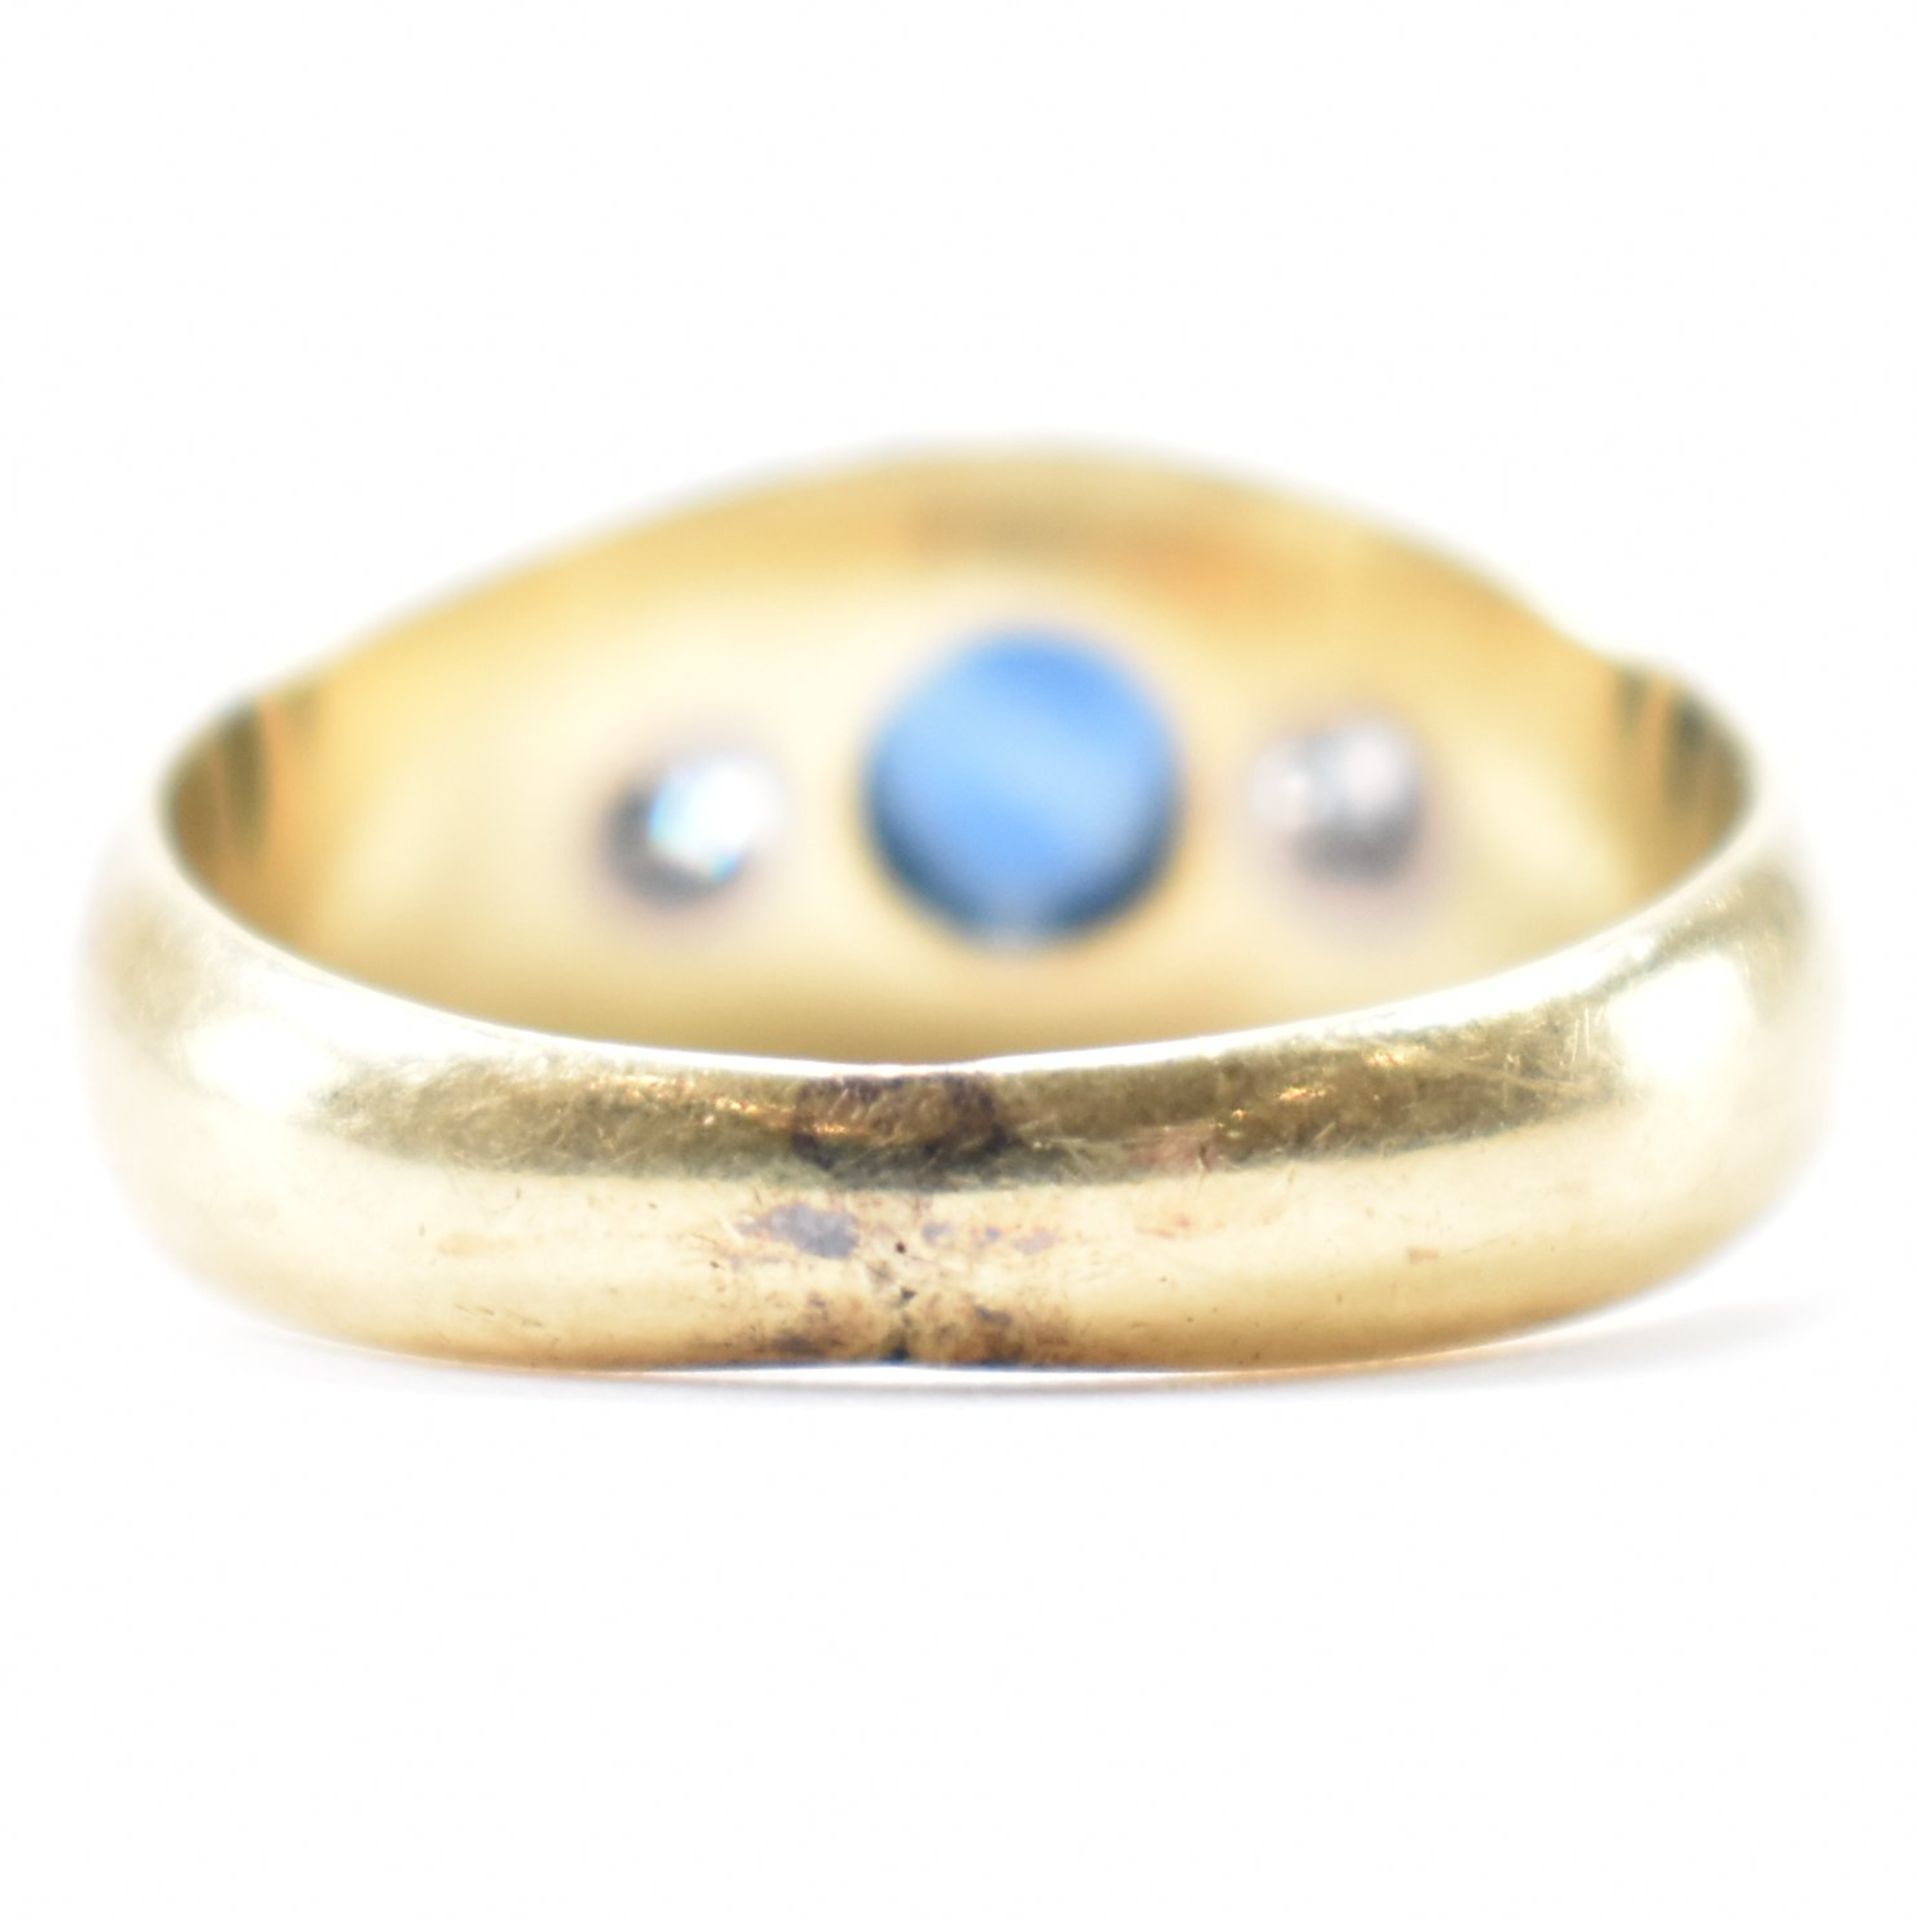 VINTAGE GOLD DIAMOND & SAPPHIRE GYPSY RING - Image 4 of 9